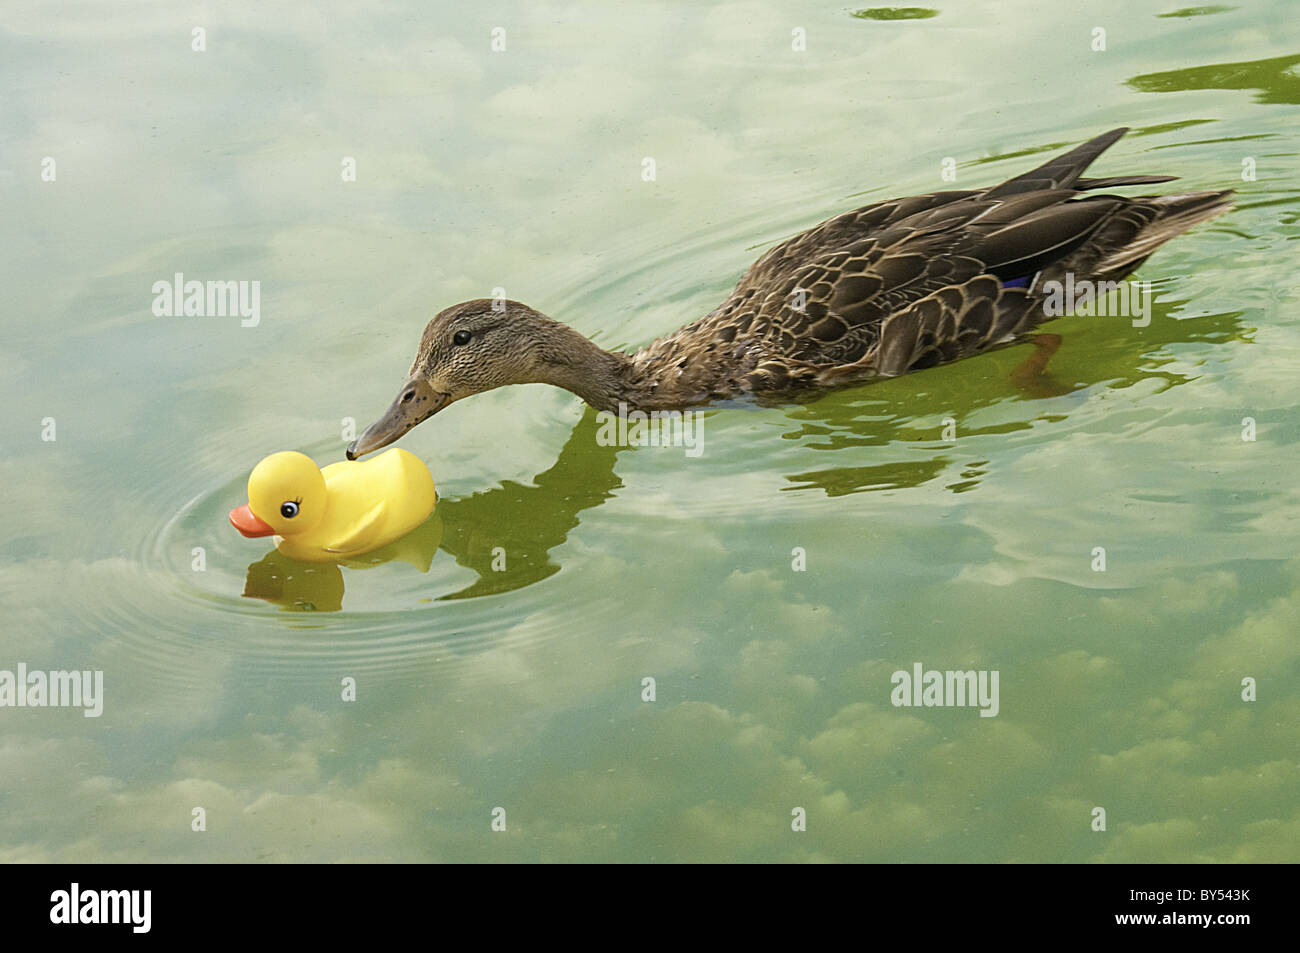 Rubber duckies kiss on the waterfront. Room for copy in the silhouette space. Stock Photo